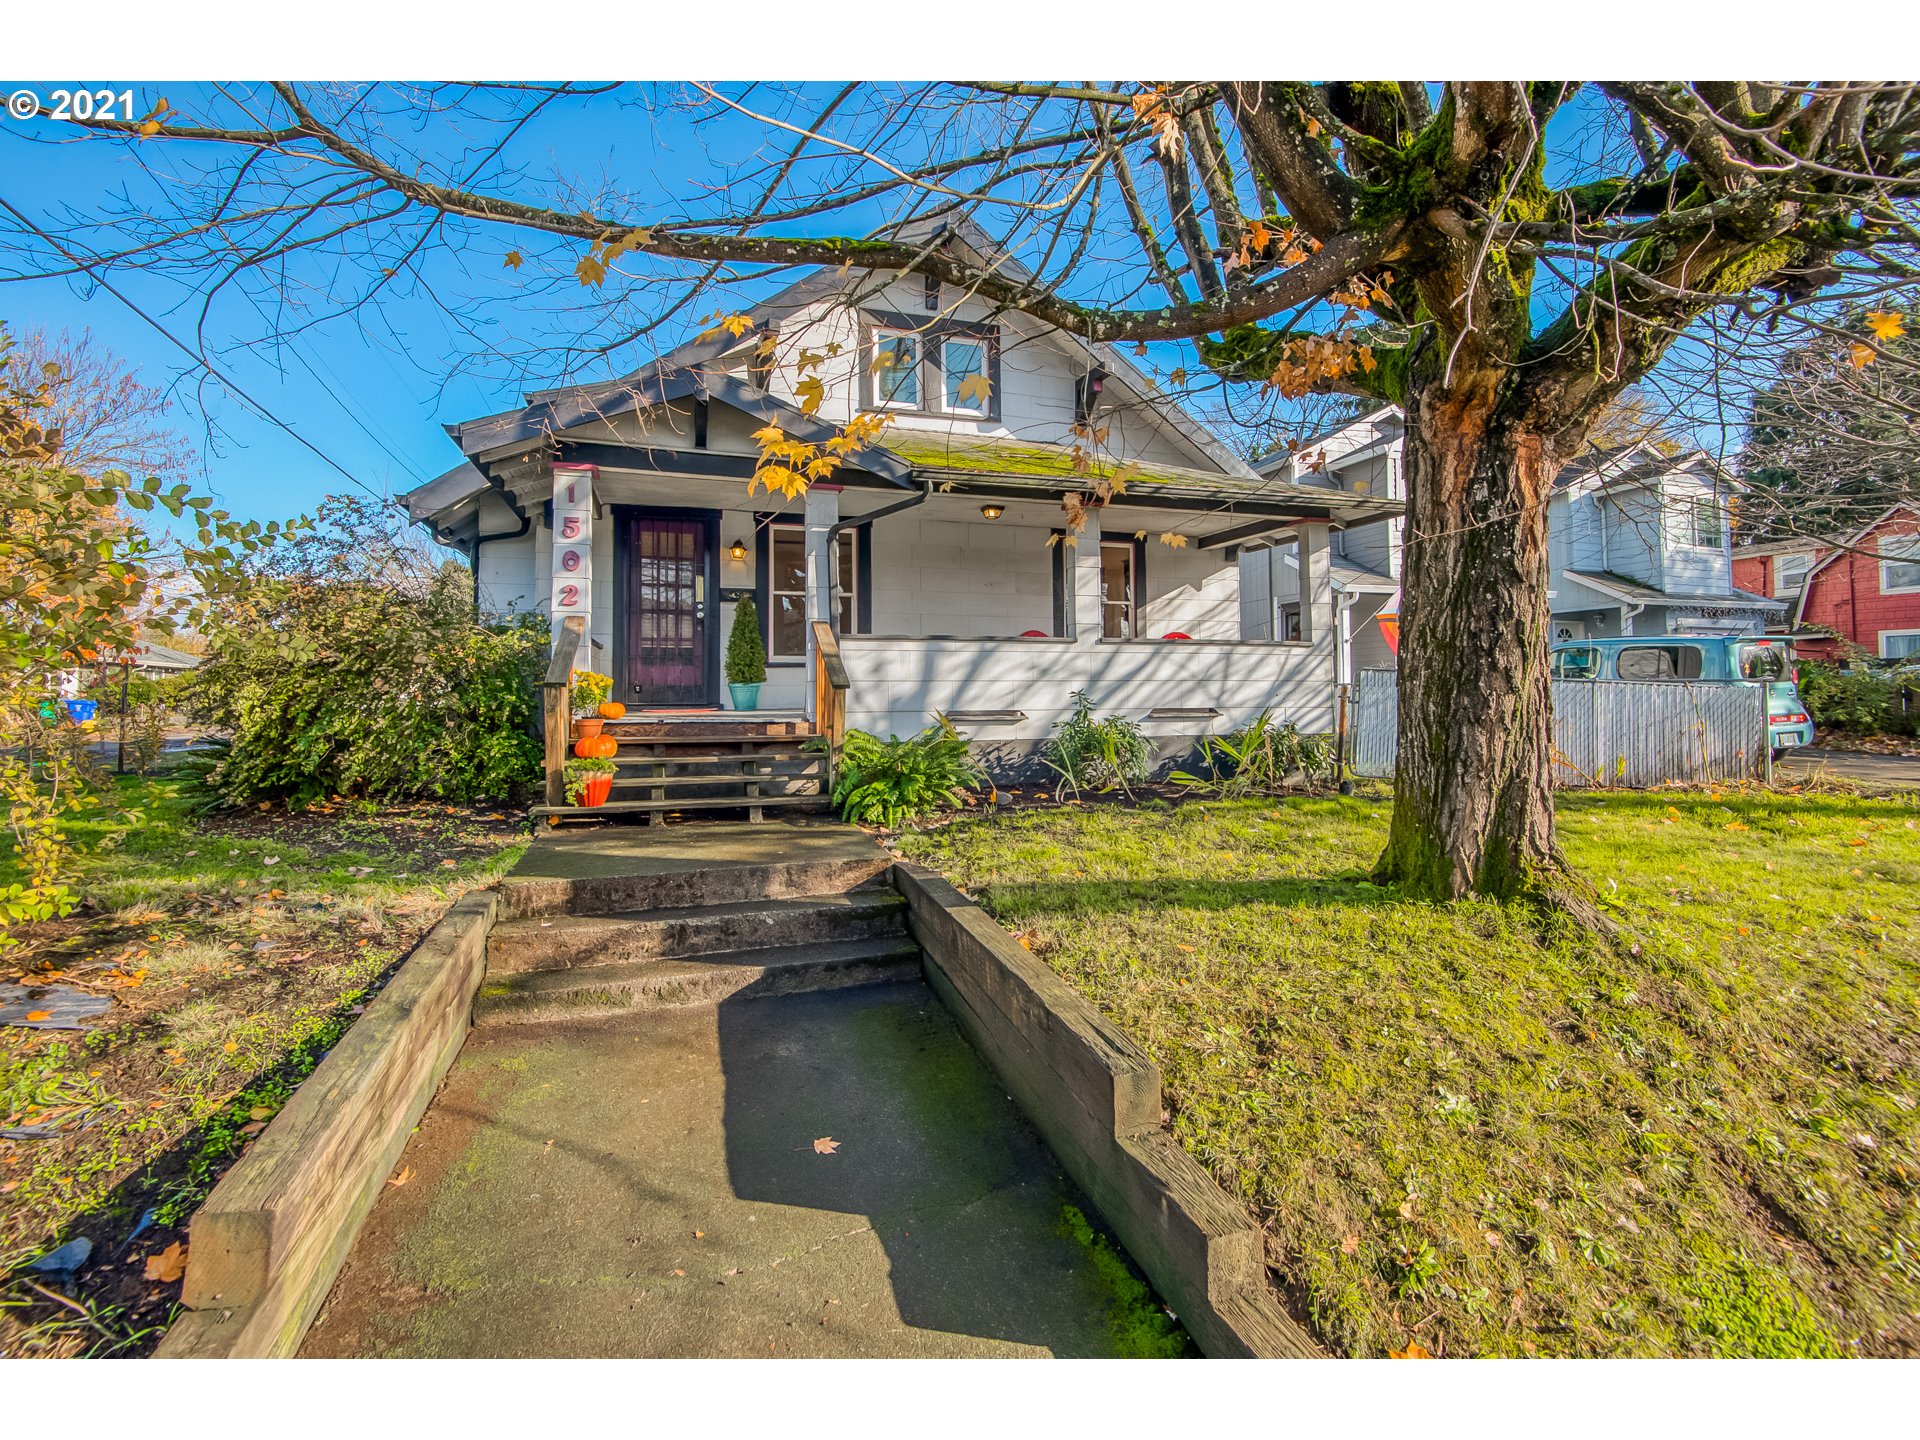 1502 SE 84TH AVE (1 of 24)